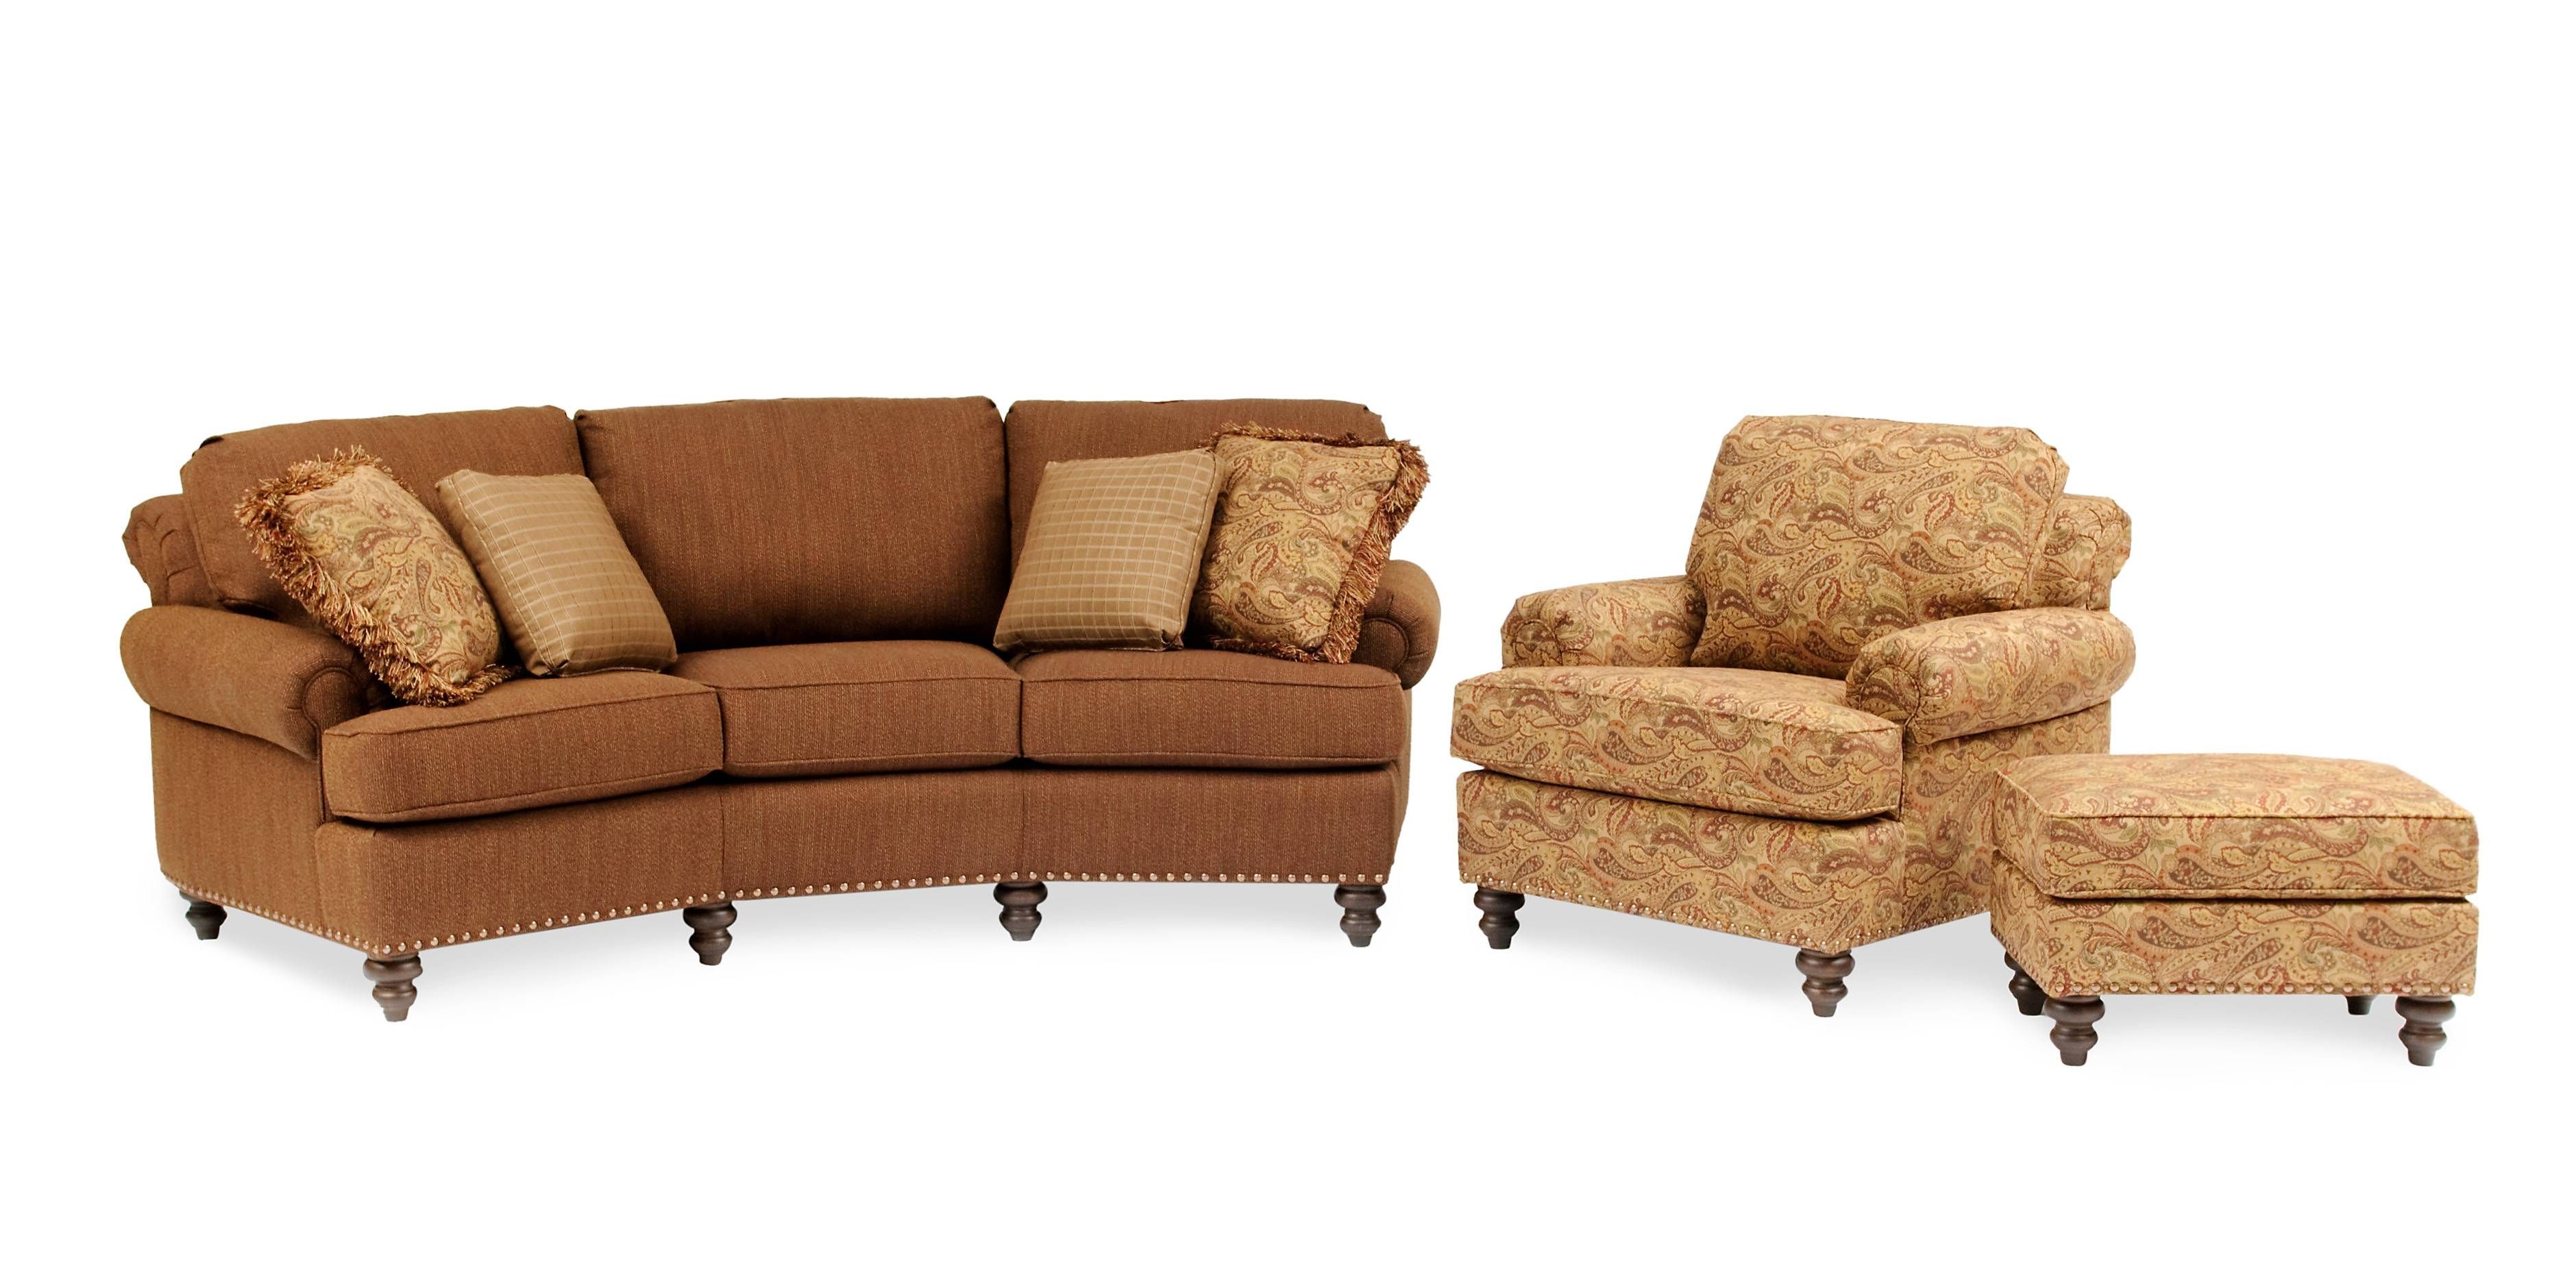 Conversation Sofa | Saugerties Furniture In Sofa Mart Chairs (View 29 of 30)